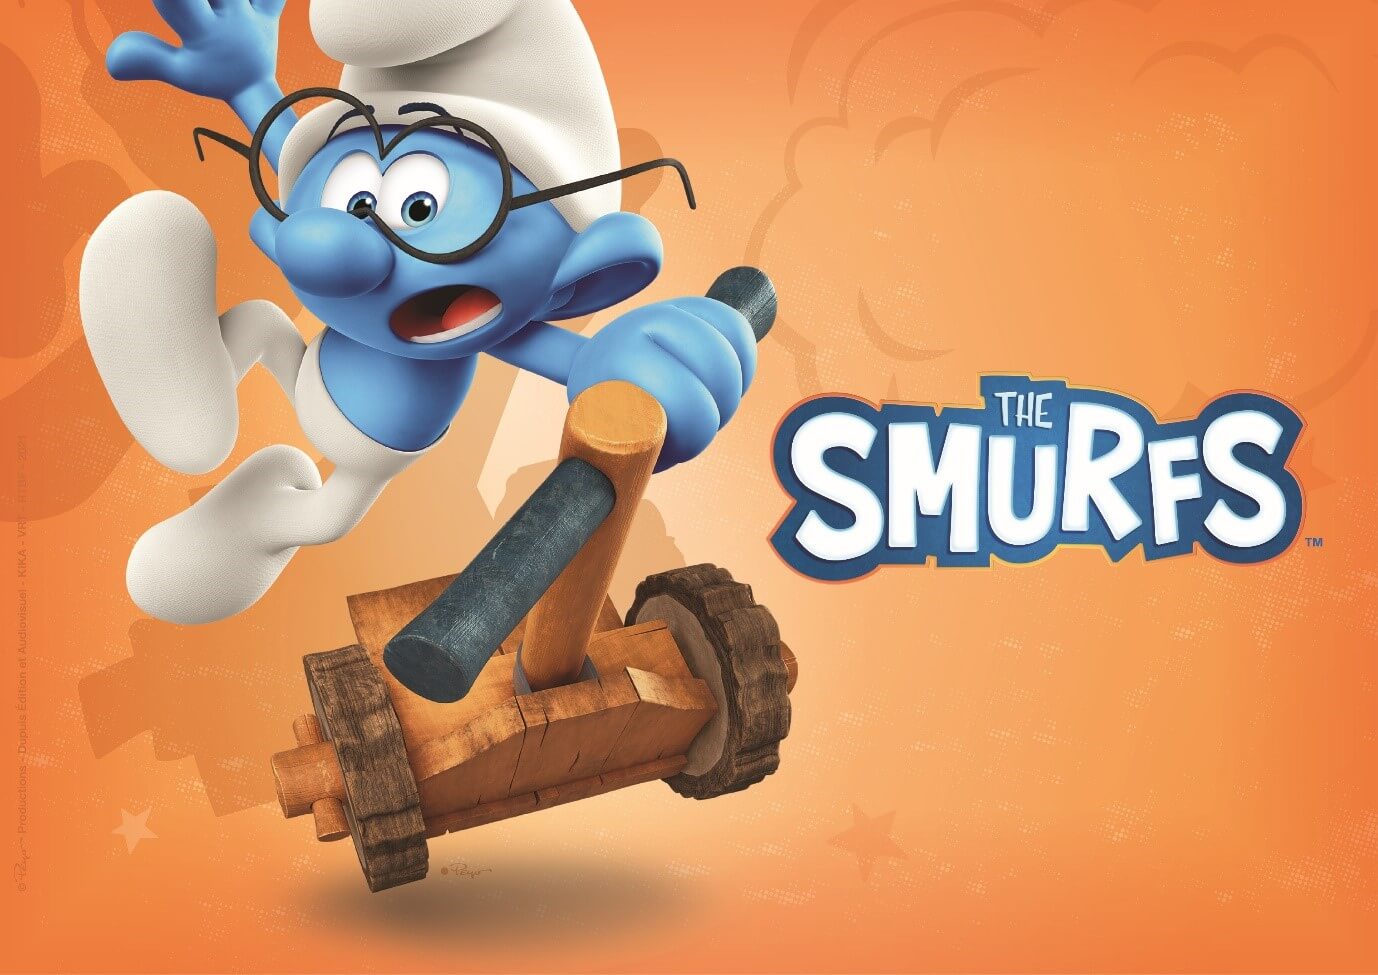 The Smurfs (IMPS-Lafig Belgium) and Athletes Today are proud to announce a new Licensing partnership for India image